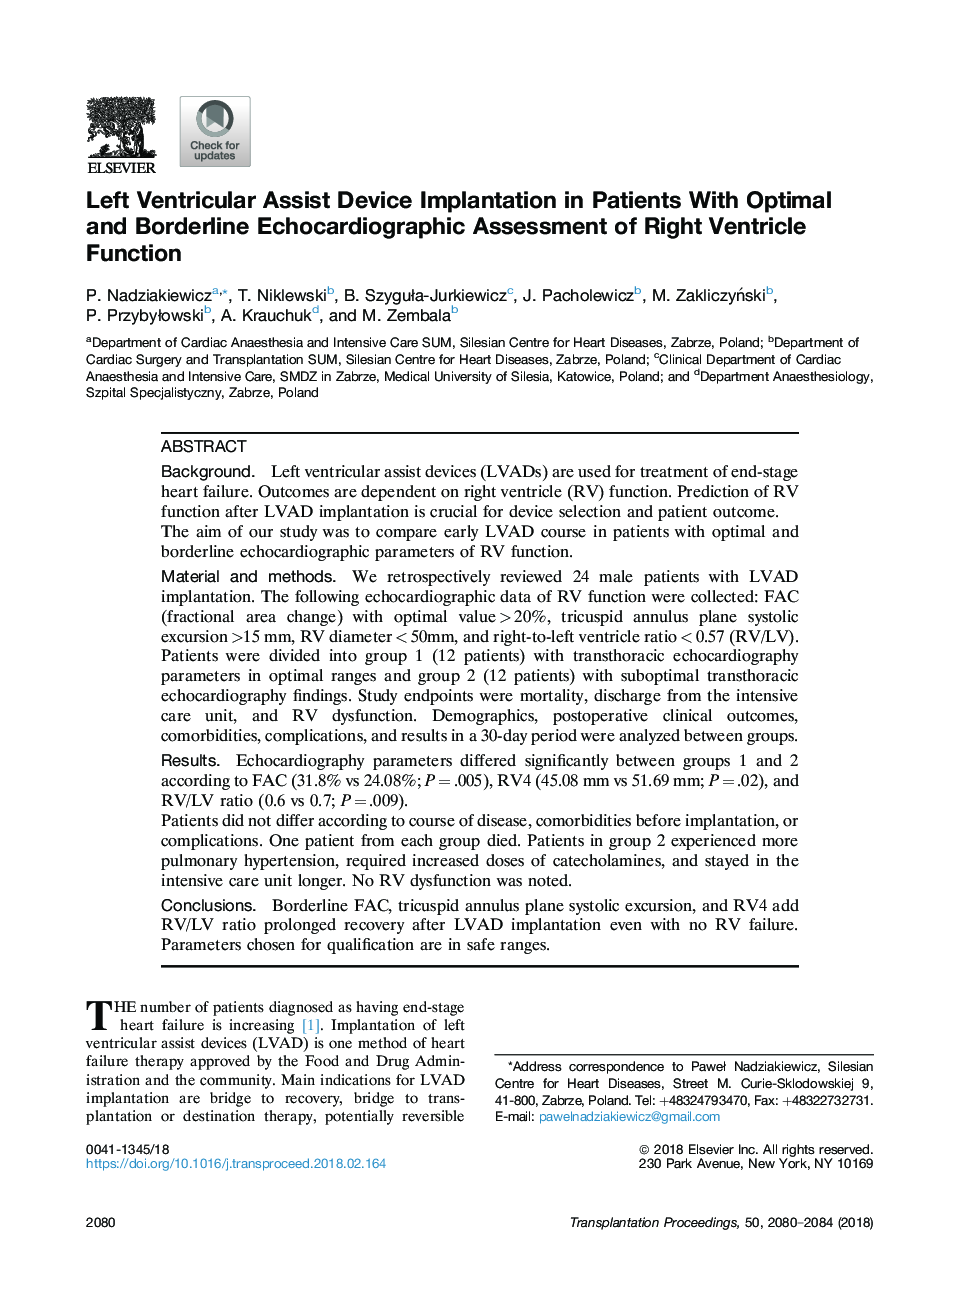 Left Ventricular Assist Device Implantation in Patients With Optimal and Borderline Echocardiographic Assessment of Right Ventricle Function